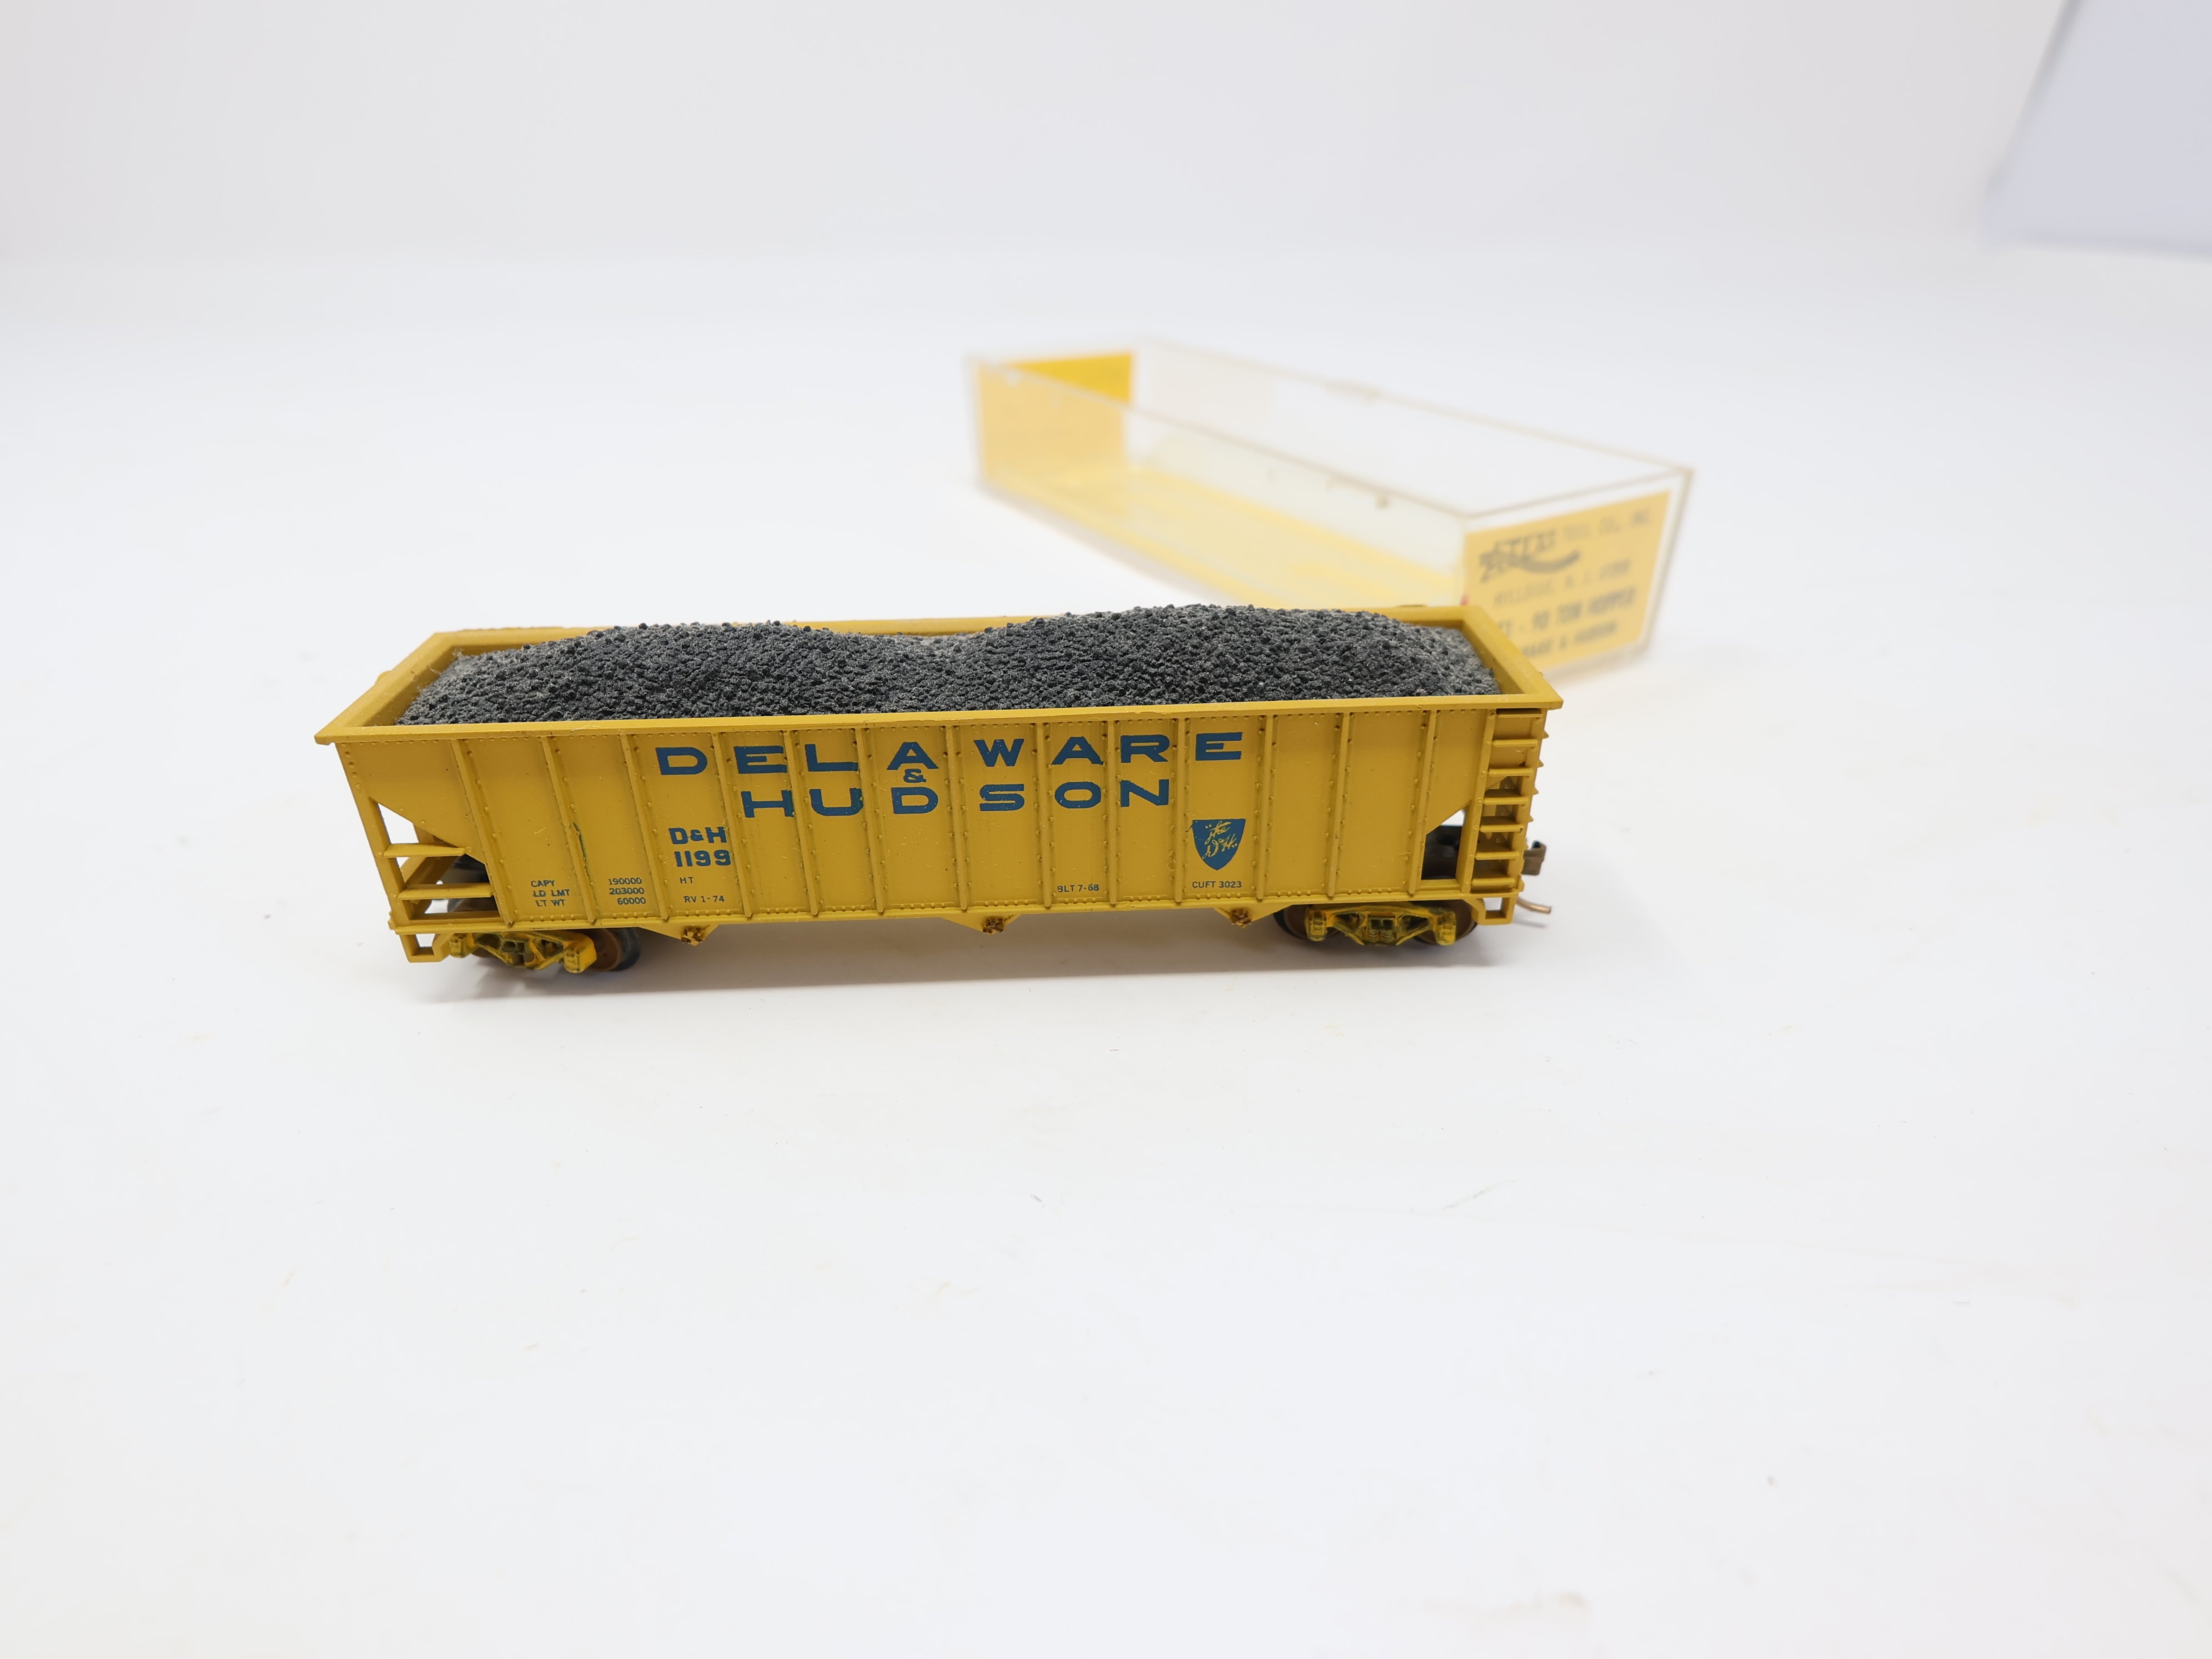 USED Atlas N Scale, 90 Ton Hopper, Delaware and Hudson D&H #1199, Weathered